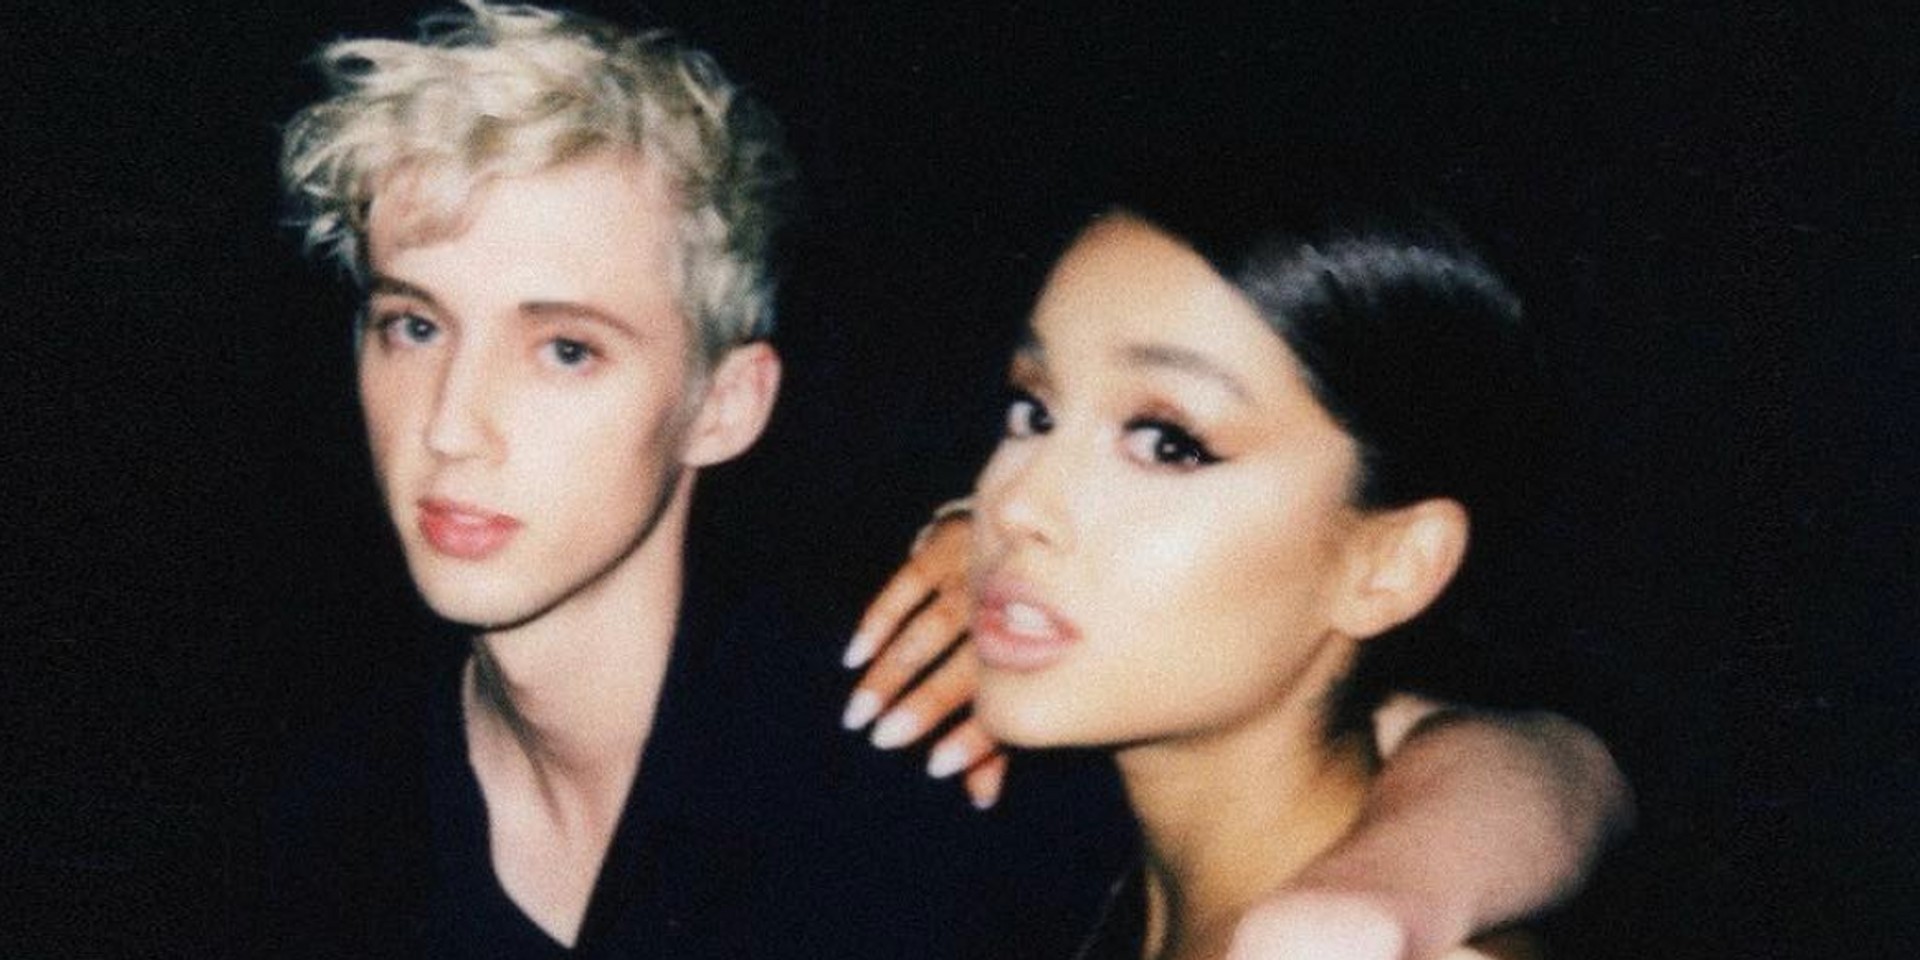 Troye Sivan releases new song with Ariana Grande, 'Dance to This' – listen